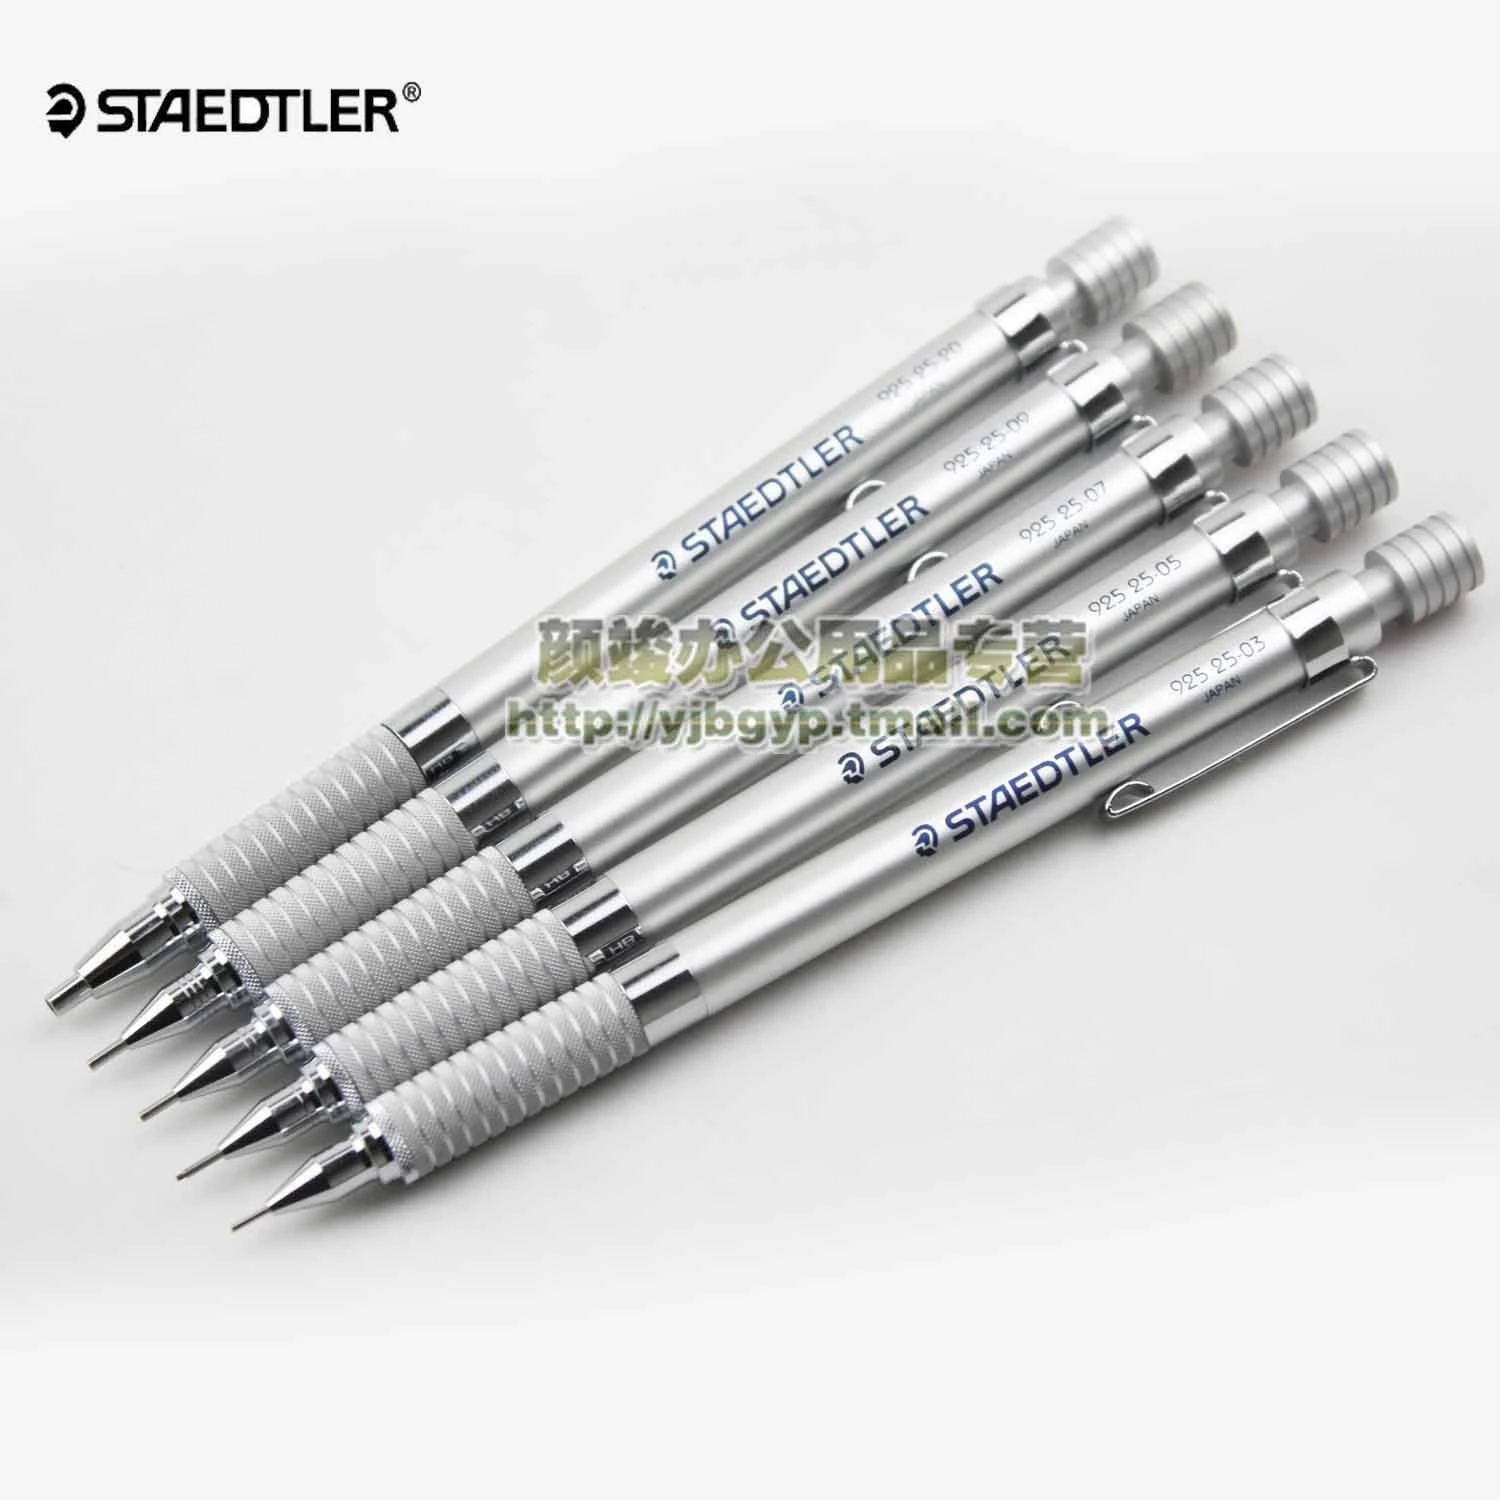 Staedtler 925 25 silver quality mechanical pencil-5 pieces